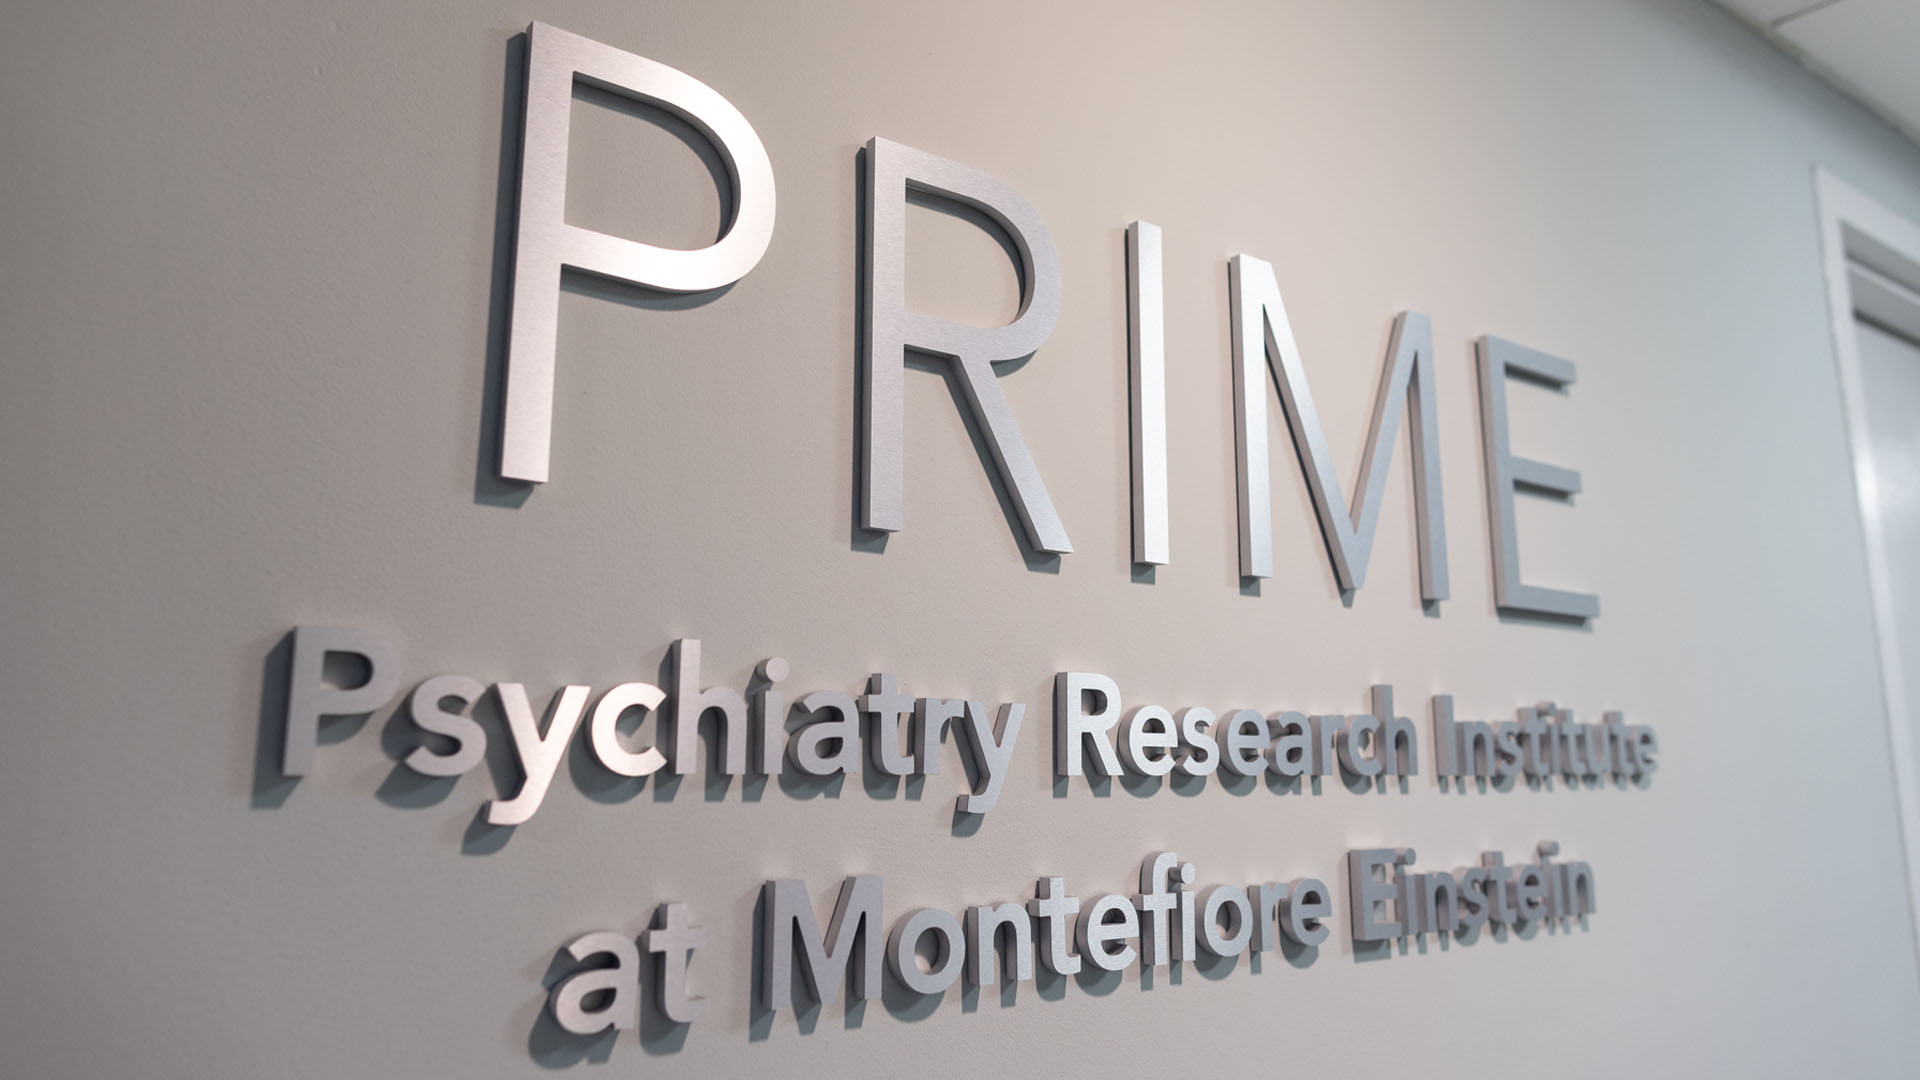 Einstein and Montefiore Celebrate Opening of Psychiatry Research Institute